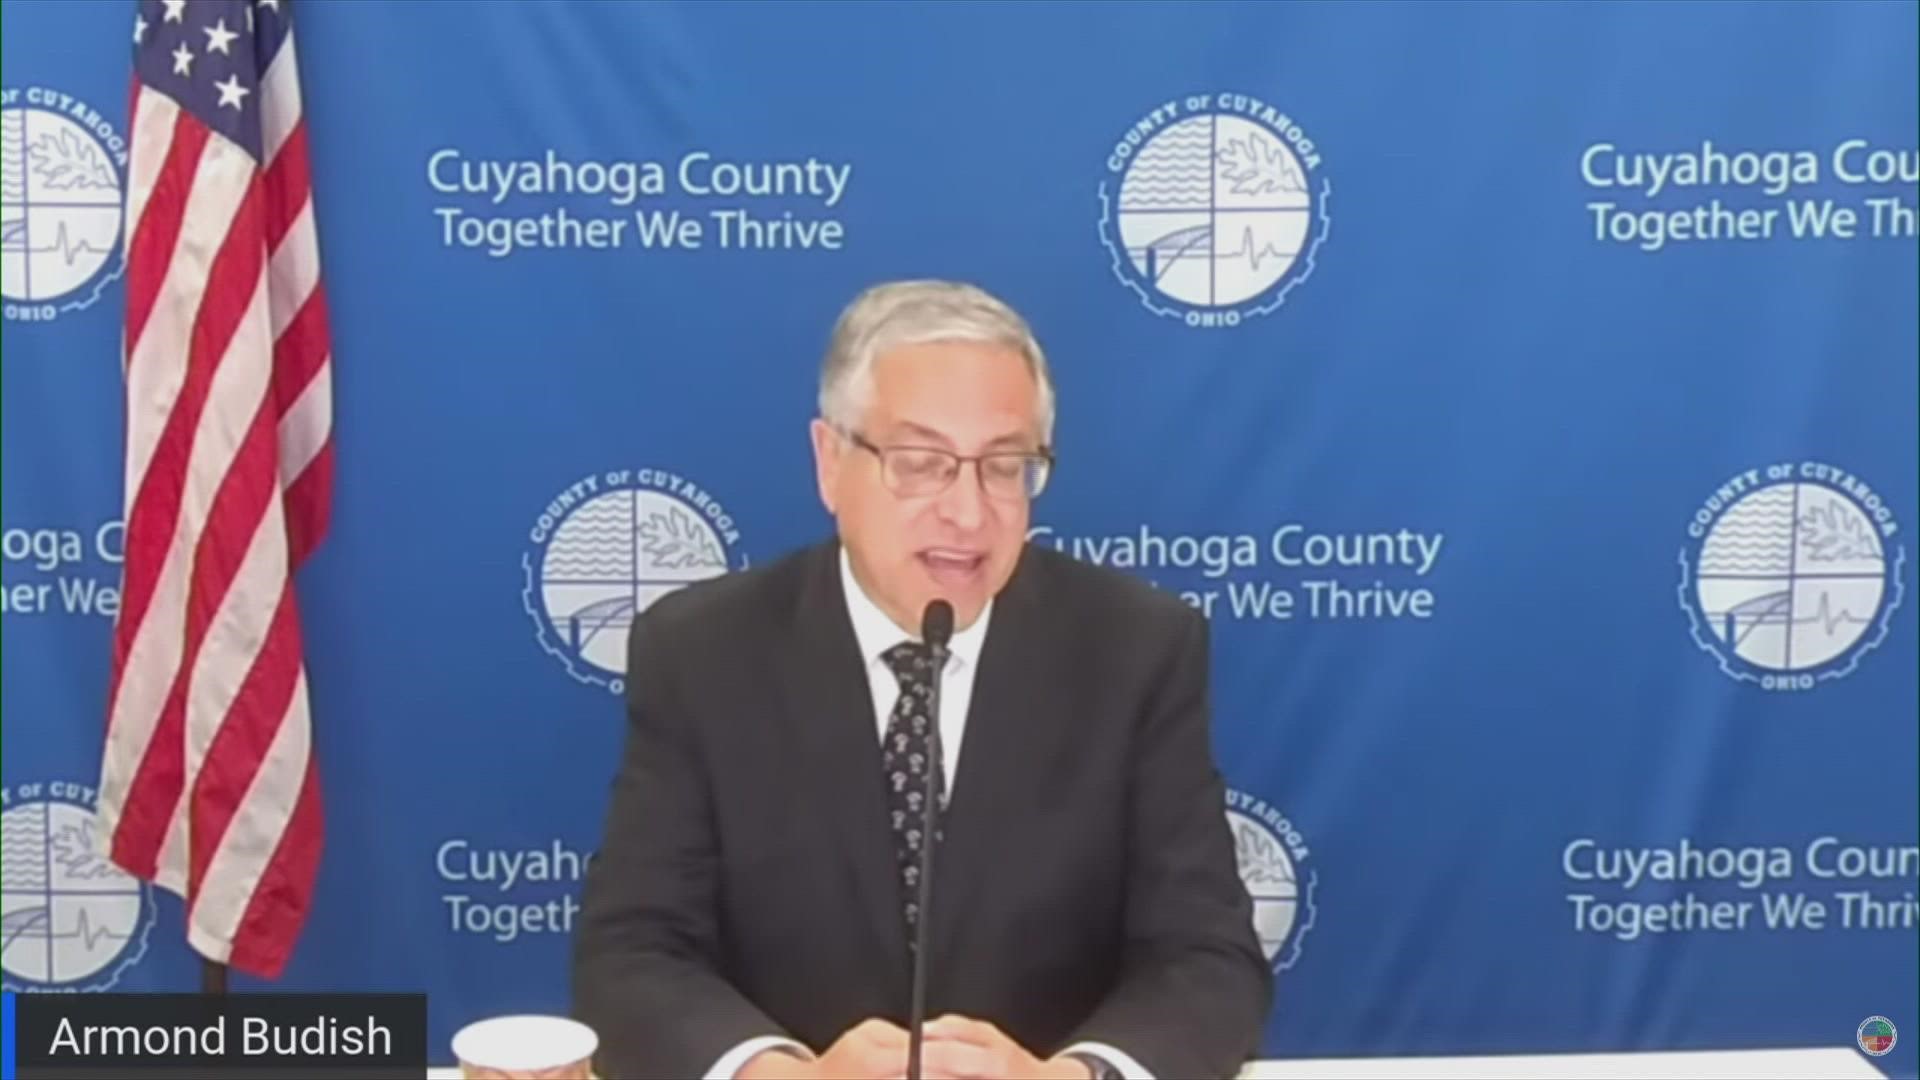 On Wednesday afternoon, Cuyahoga County Executive Armond Budish and the Cuyahoga County Board of Health provided an update on the COVID-19 pandemic in Northeast Ohio